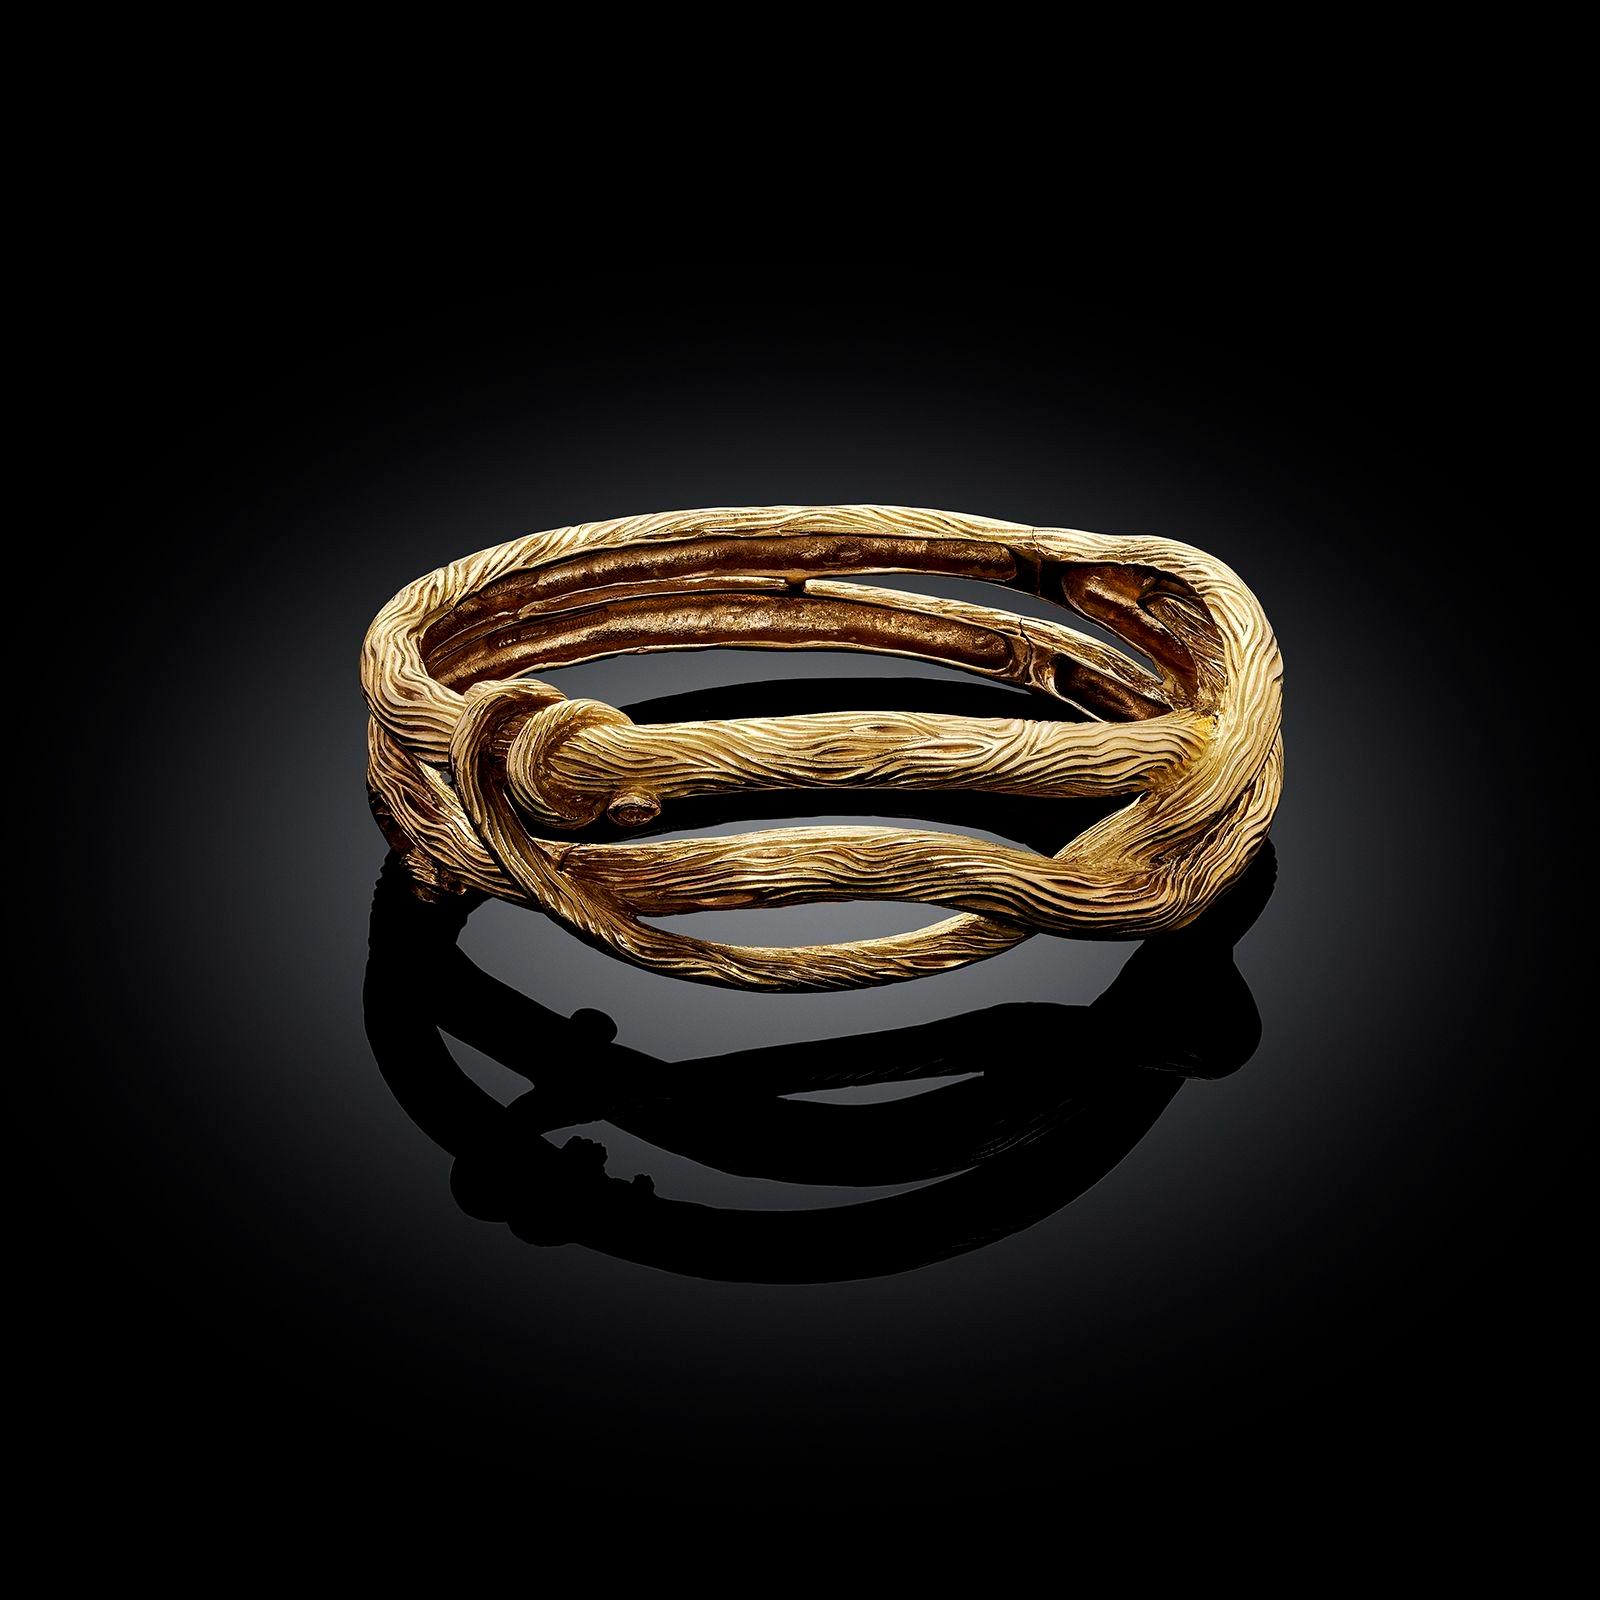 A vintage yellow gold bangle bracelet by Angela Cummings, 1985. The bangle is designed as an organic, twisting style with the gold engraved with fluid lines stylised wood grain. The bangle opens with a side hinge and a concealed tongue and box